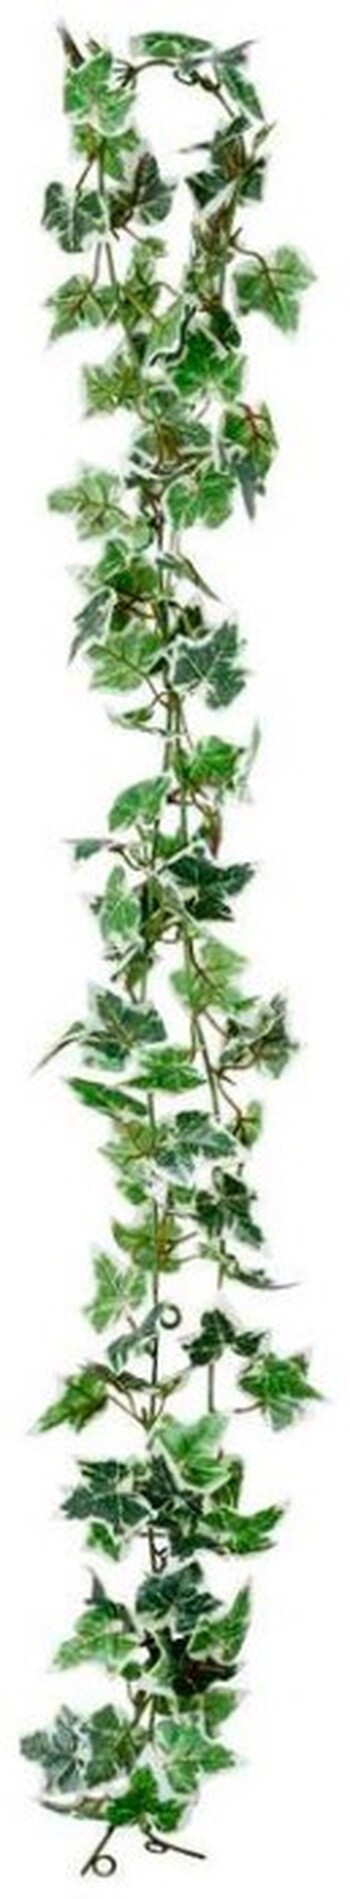 30% off Ivy Garland Multi 6ft